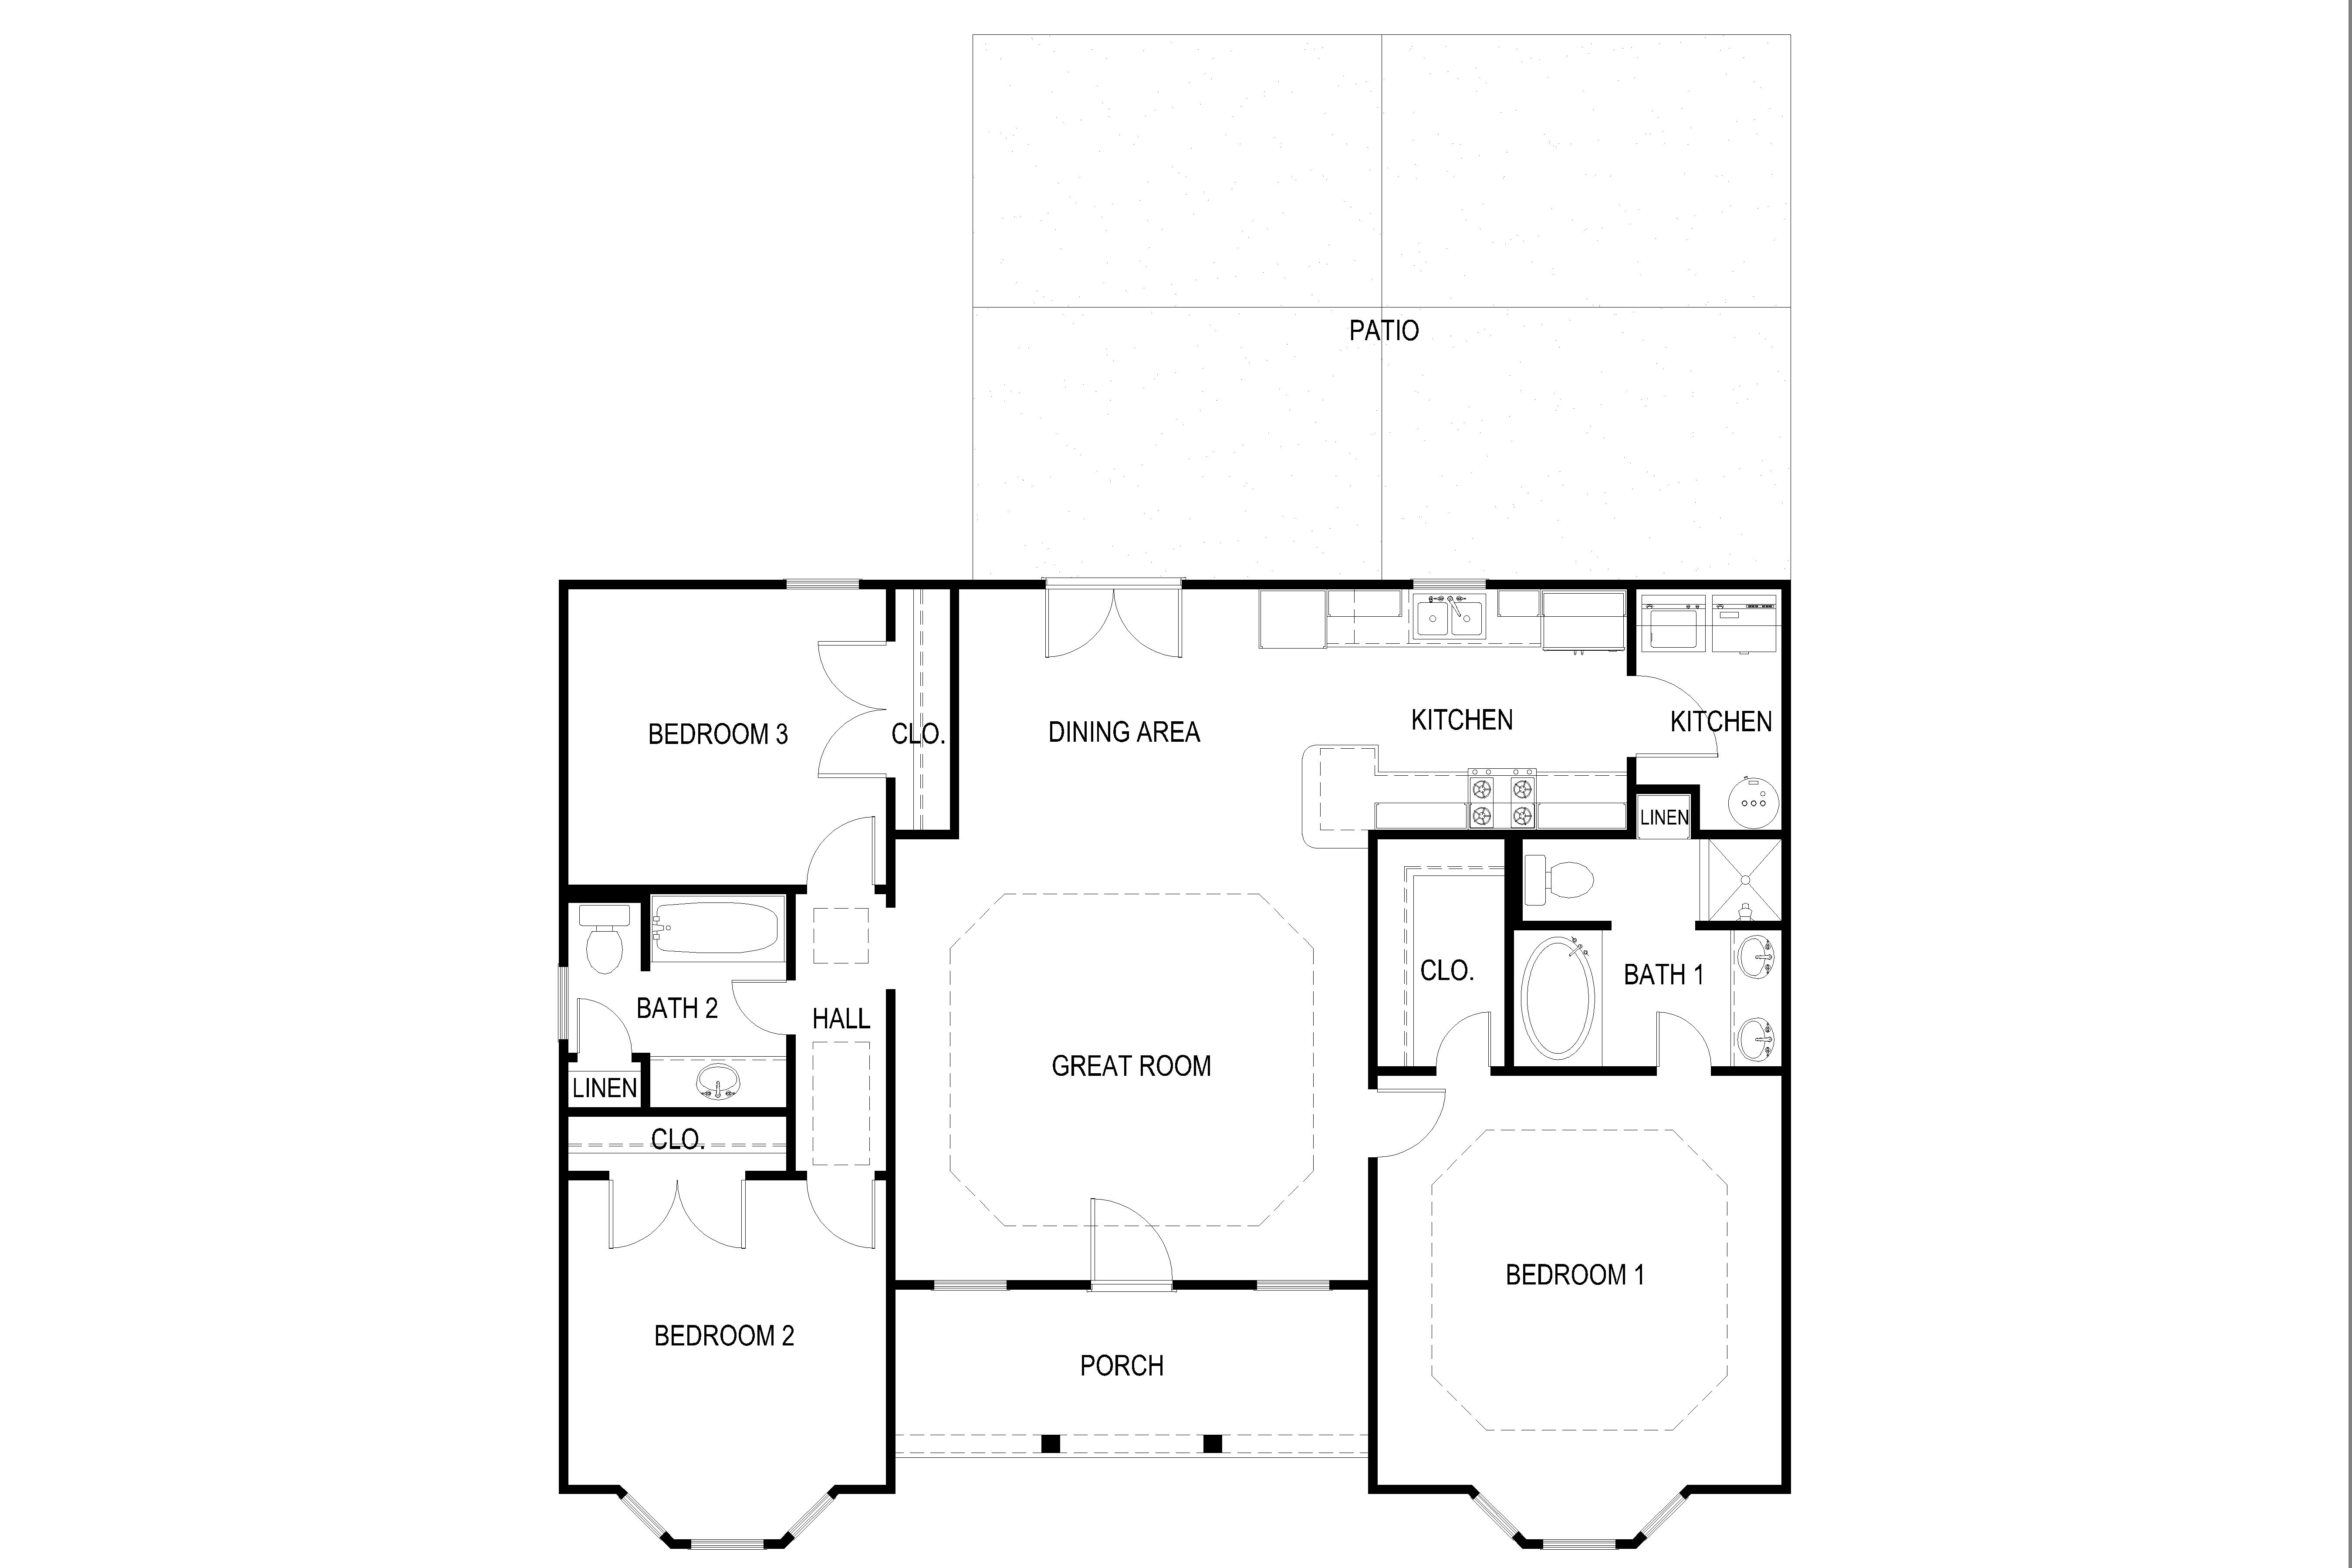 Small House Plan | Under 2000 sq ft | 3 Bedroom | 2 Bath | 1,408 Sq